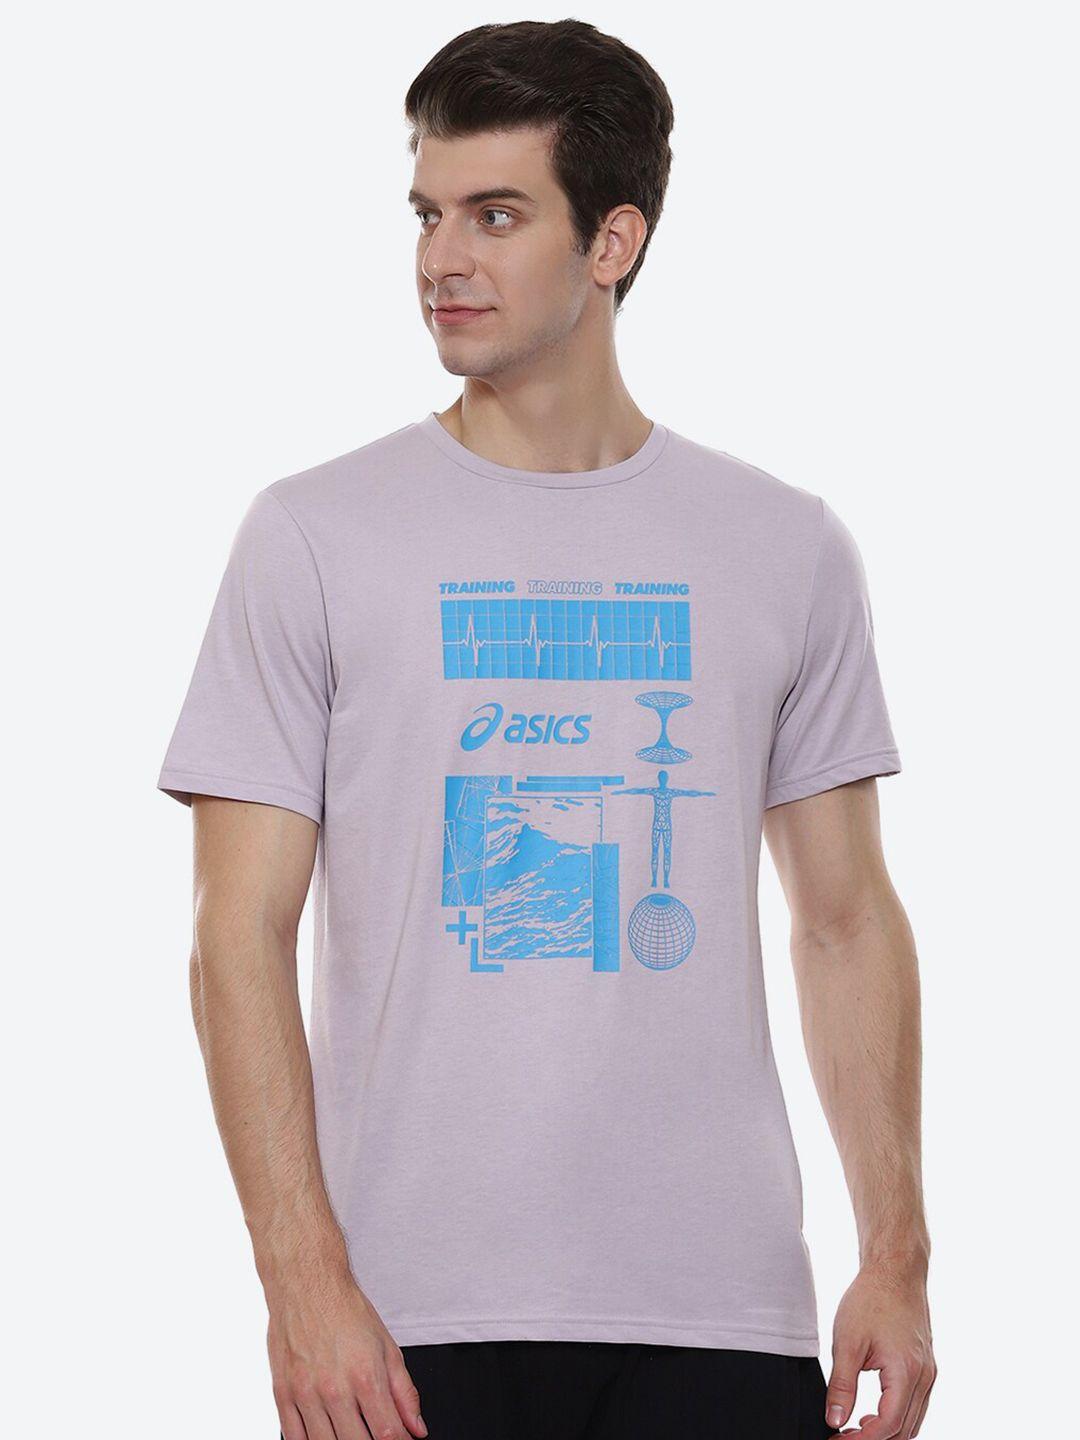 asics-graphic-1-ss-printed-cotton-sports-t-shirt